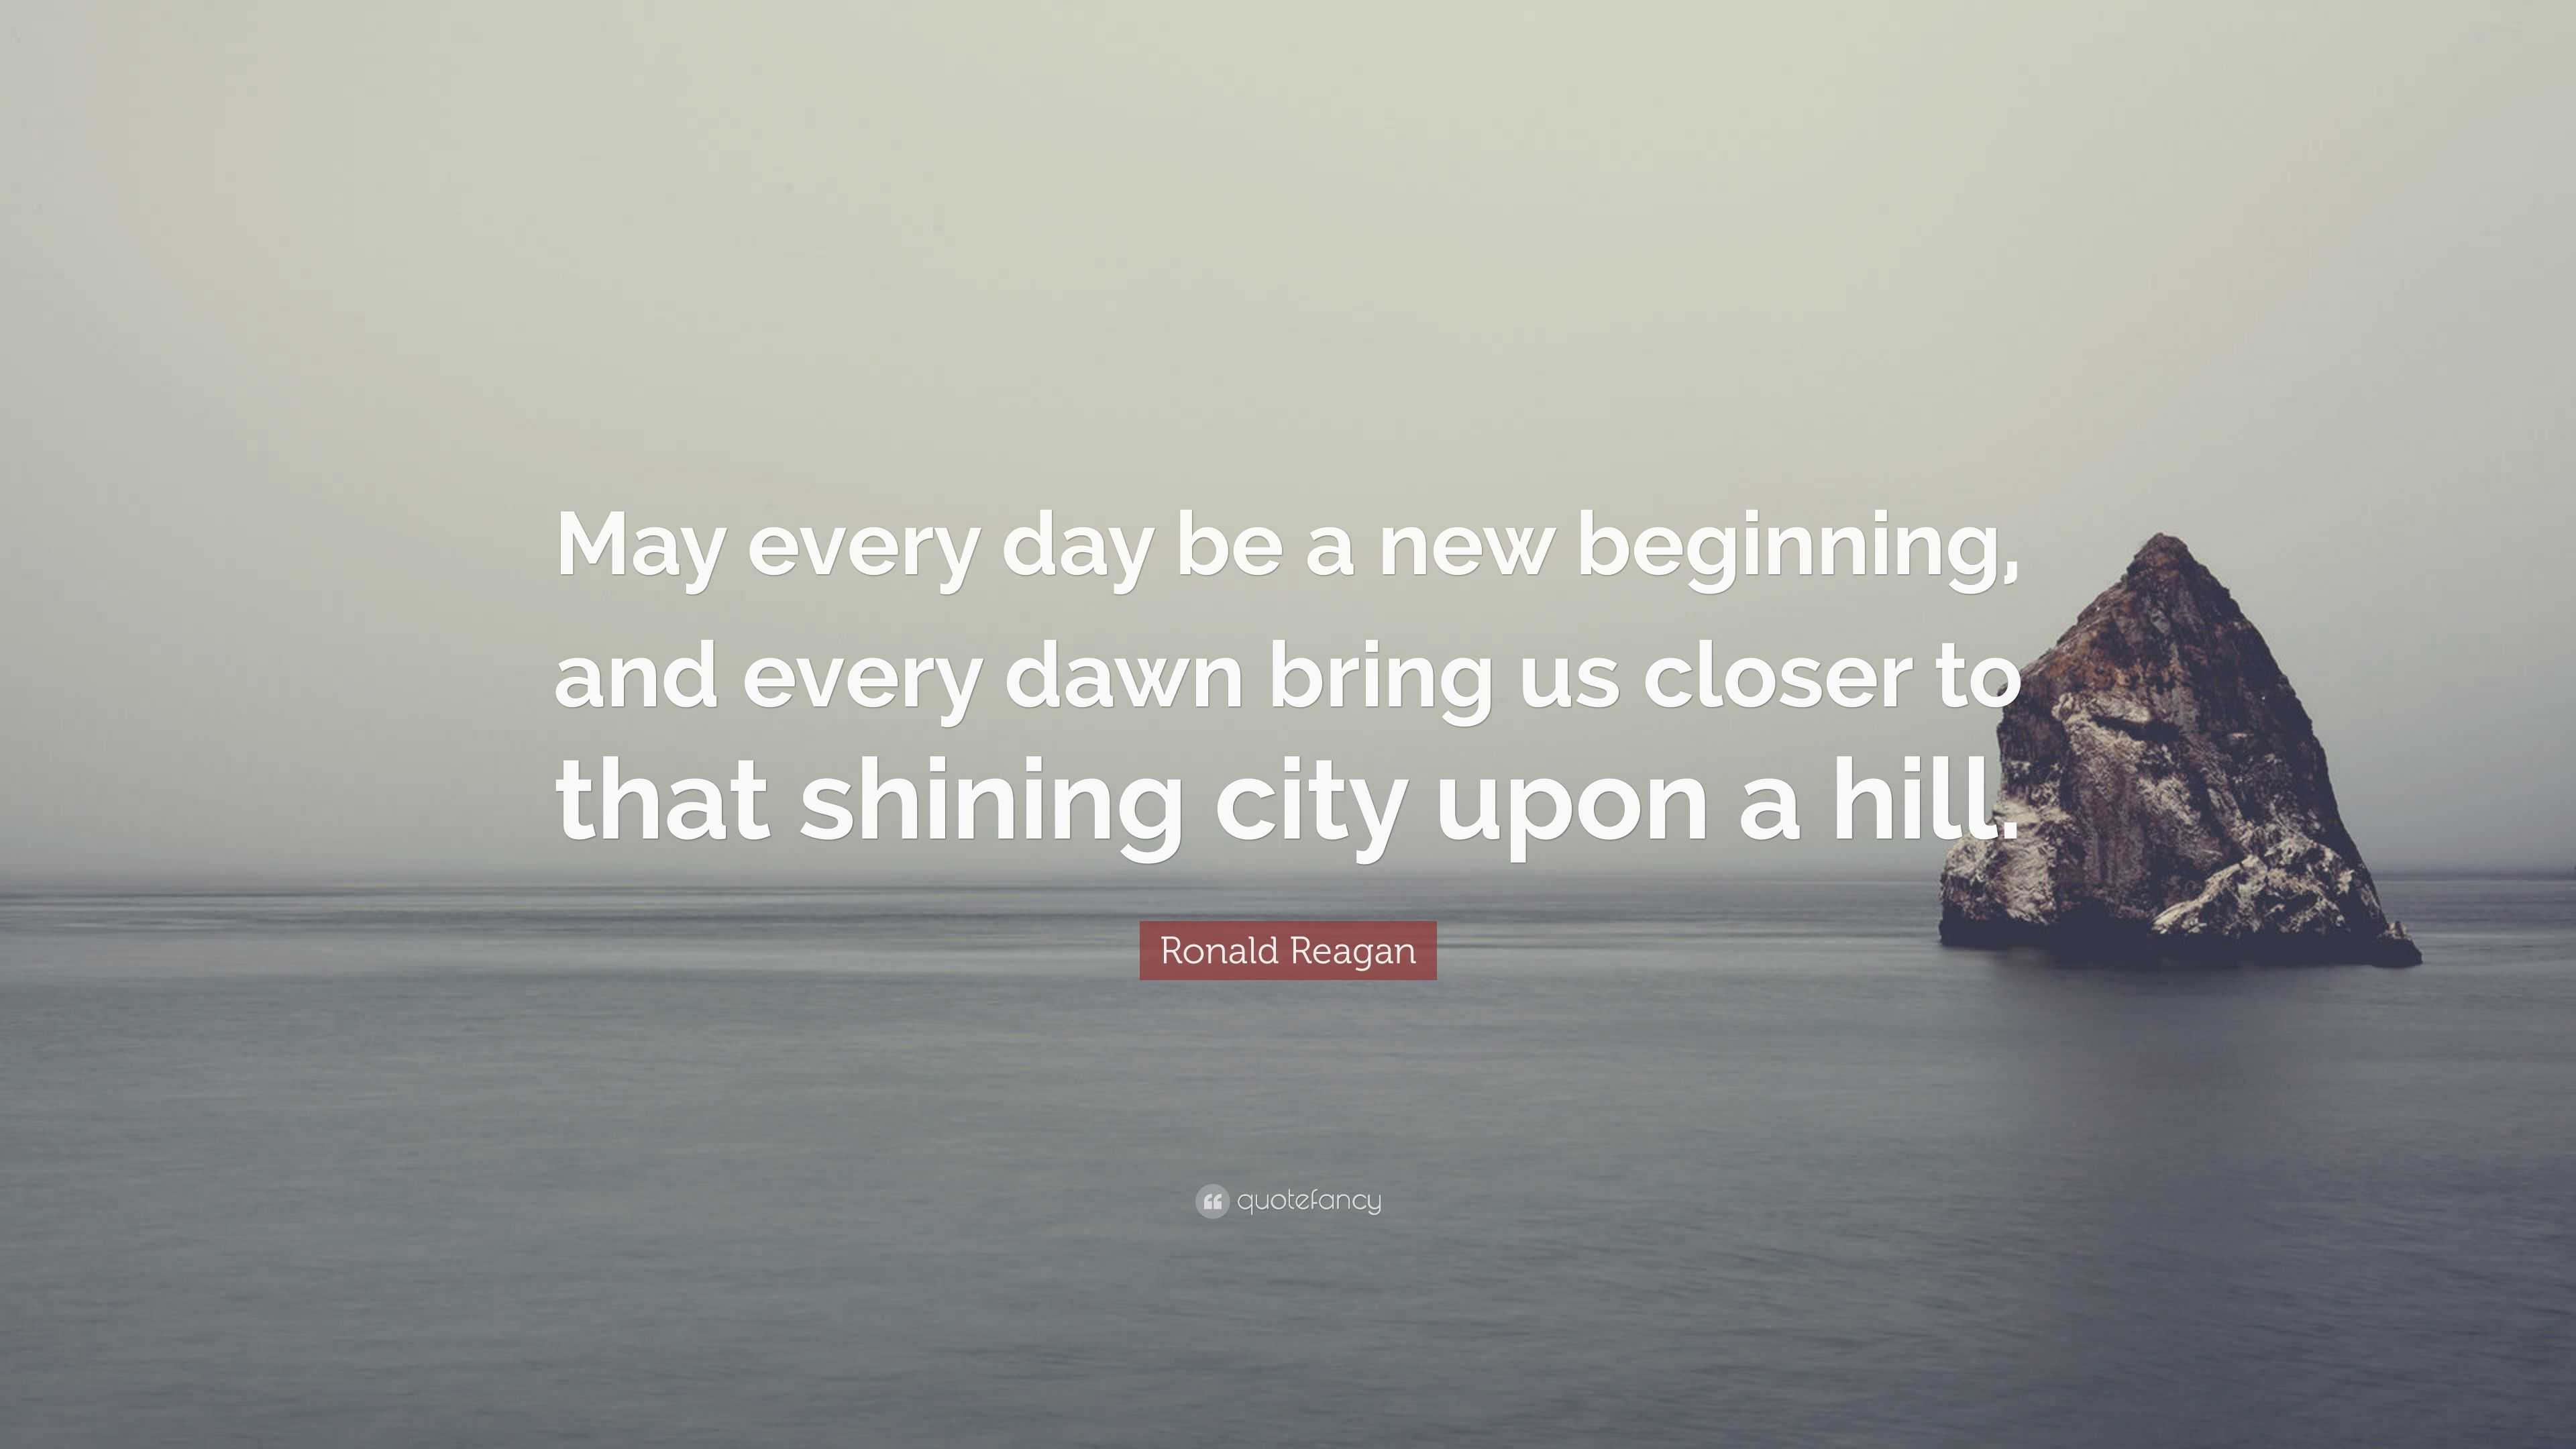 Ronald Reagan Quote “May every day be a new beginning